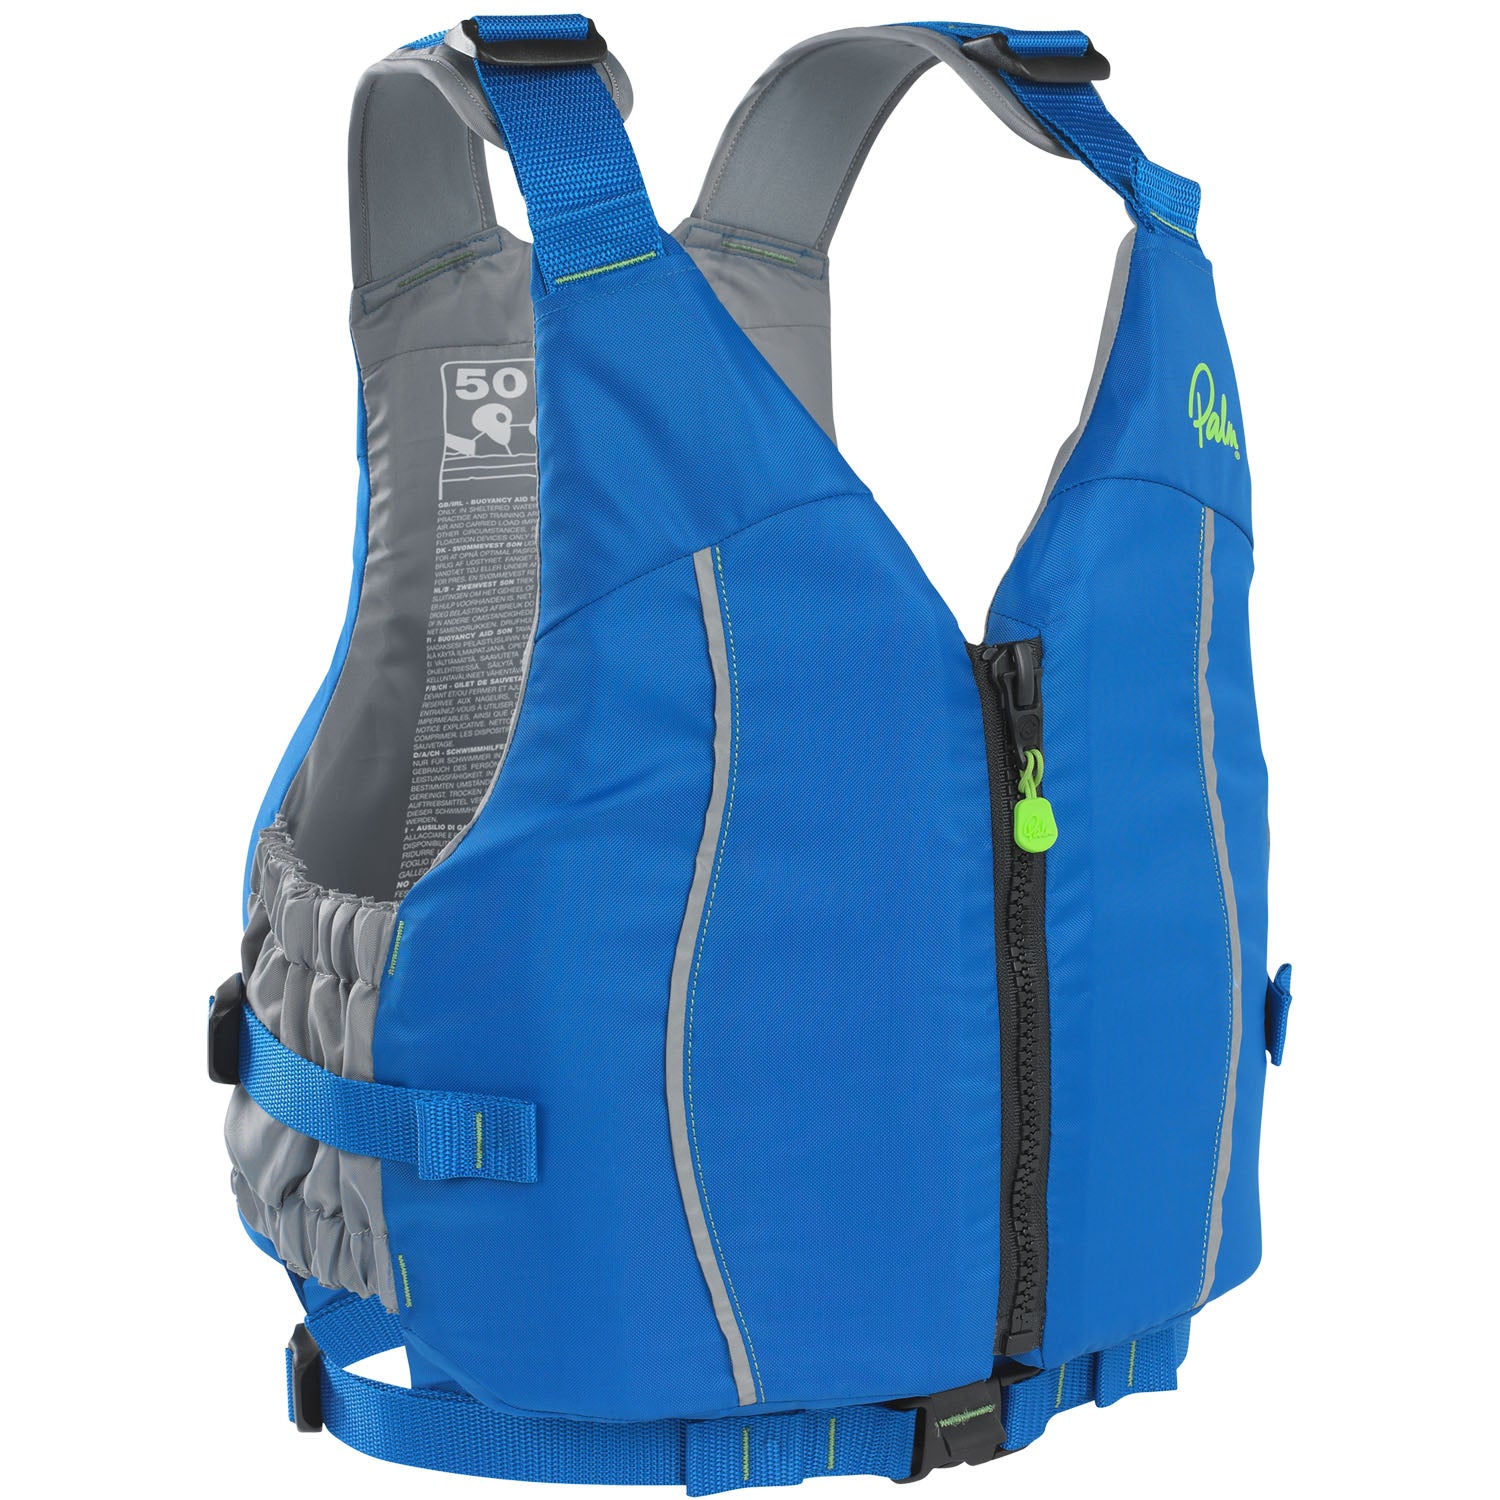 Palm Quest Buoyancy Aid in Blue